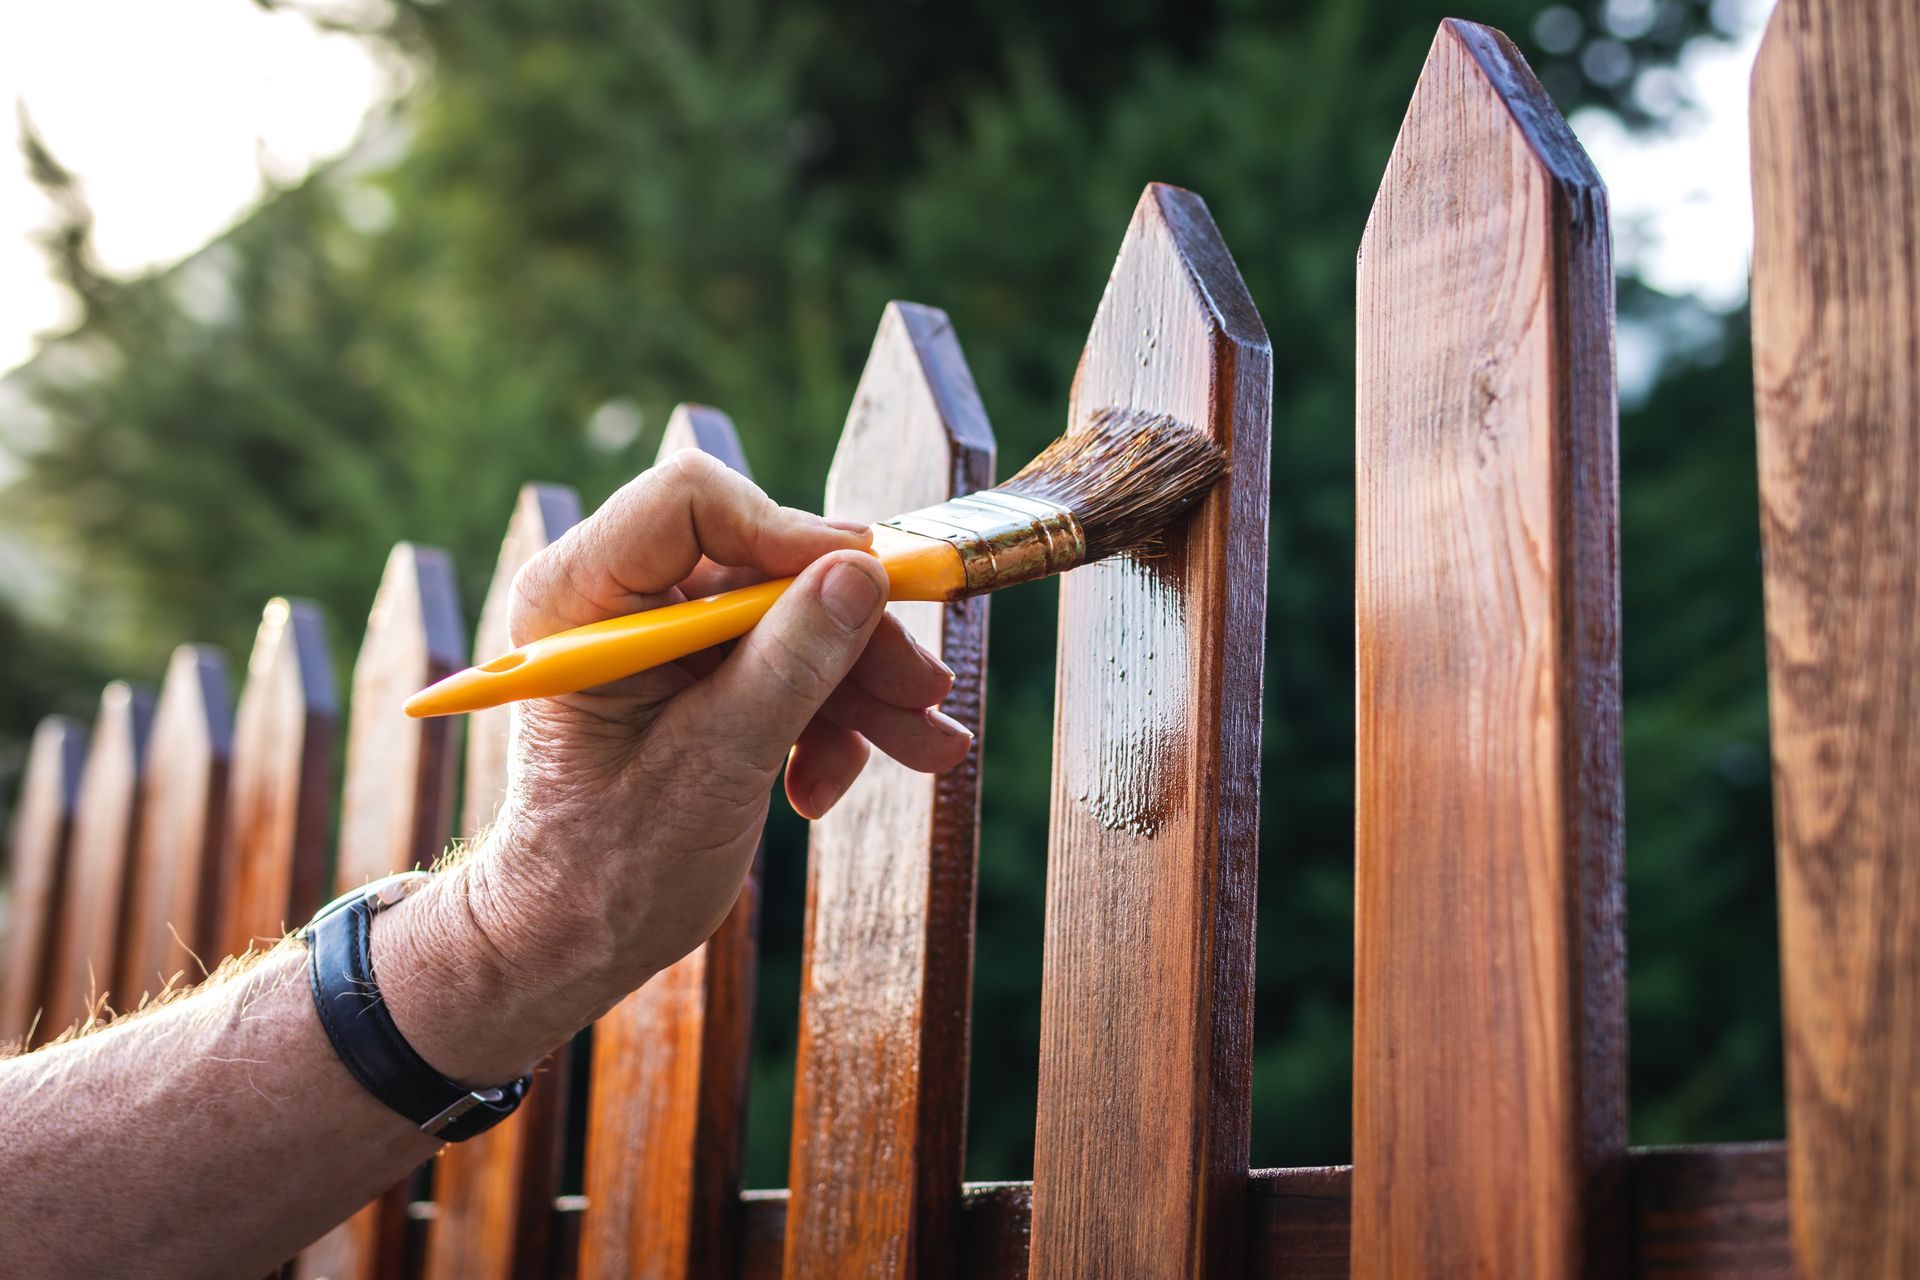 A painter using a paintbrush to stain a wooden picket fence in the backyard.